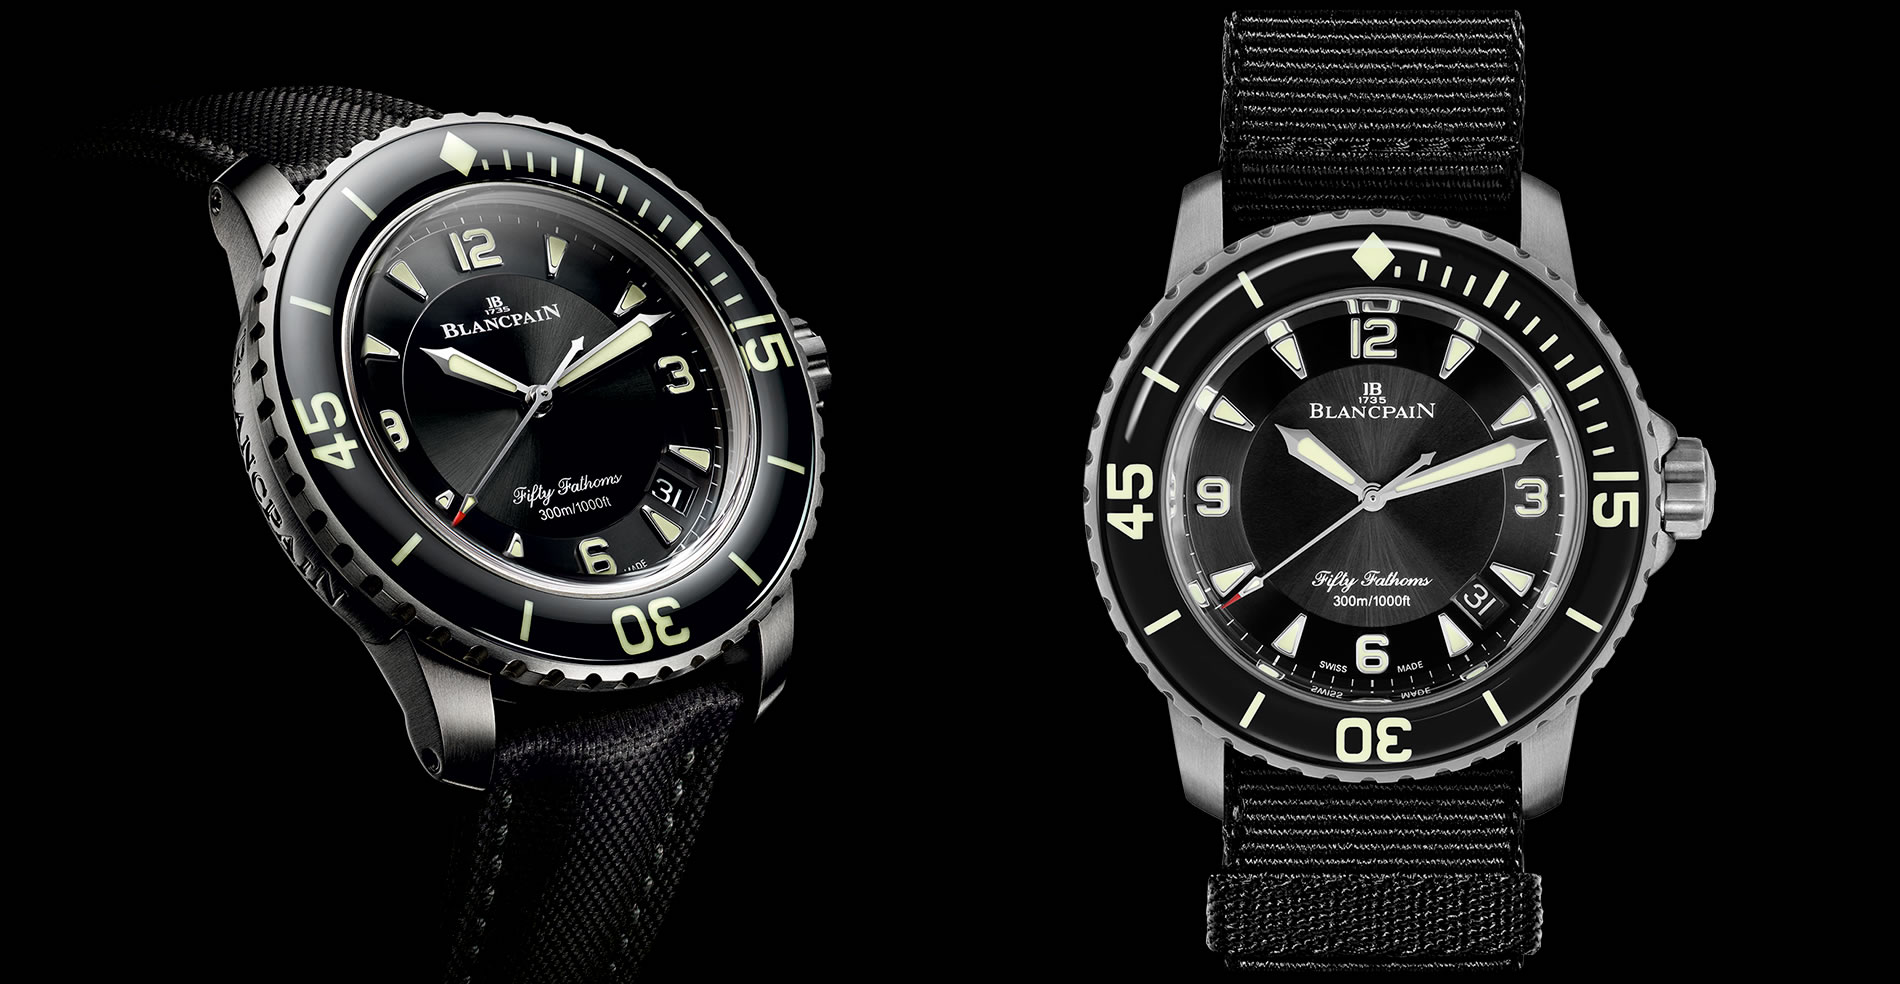 The icon of Blancpain’s Fifty Fathoms collection appears in a new titanium version